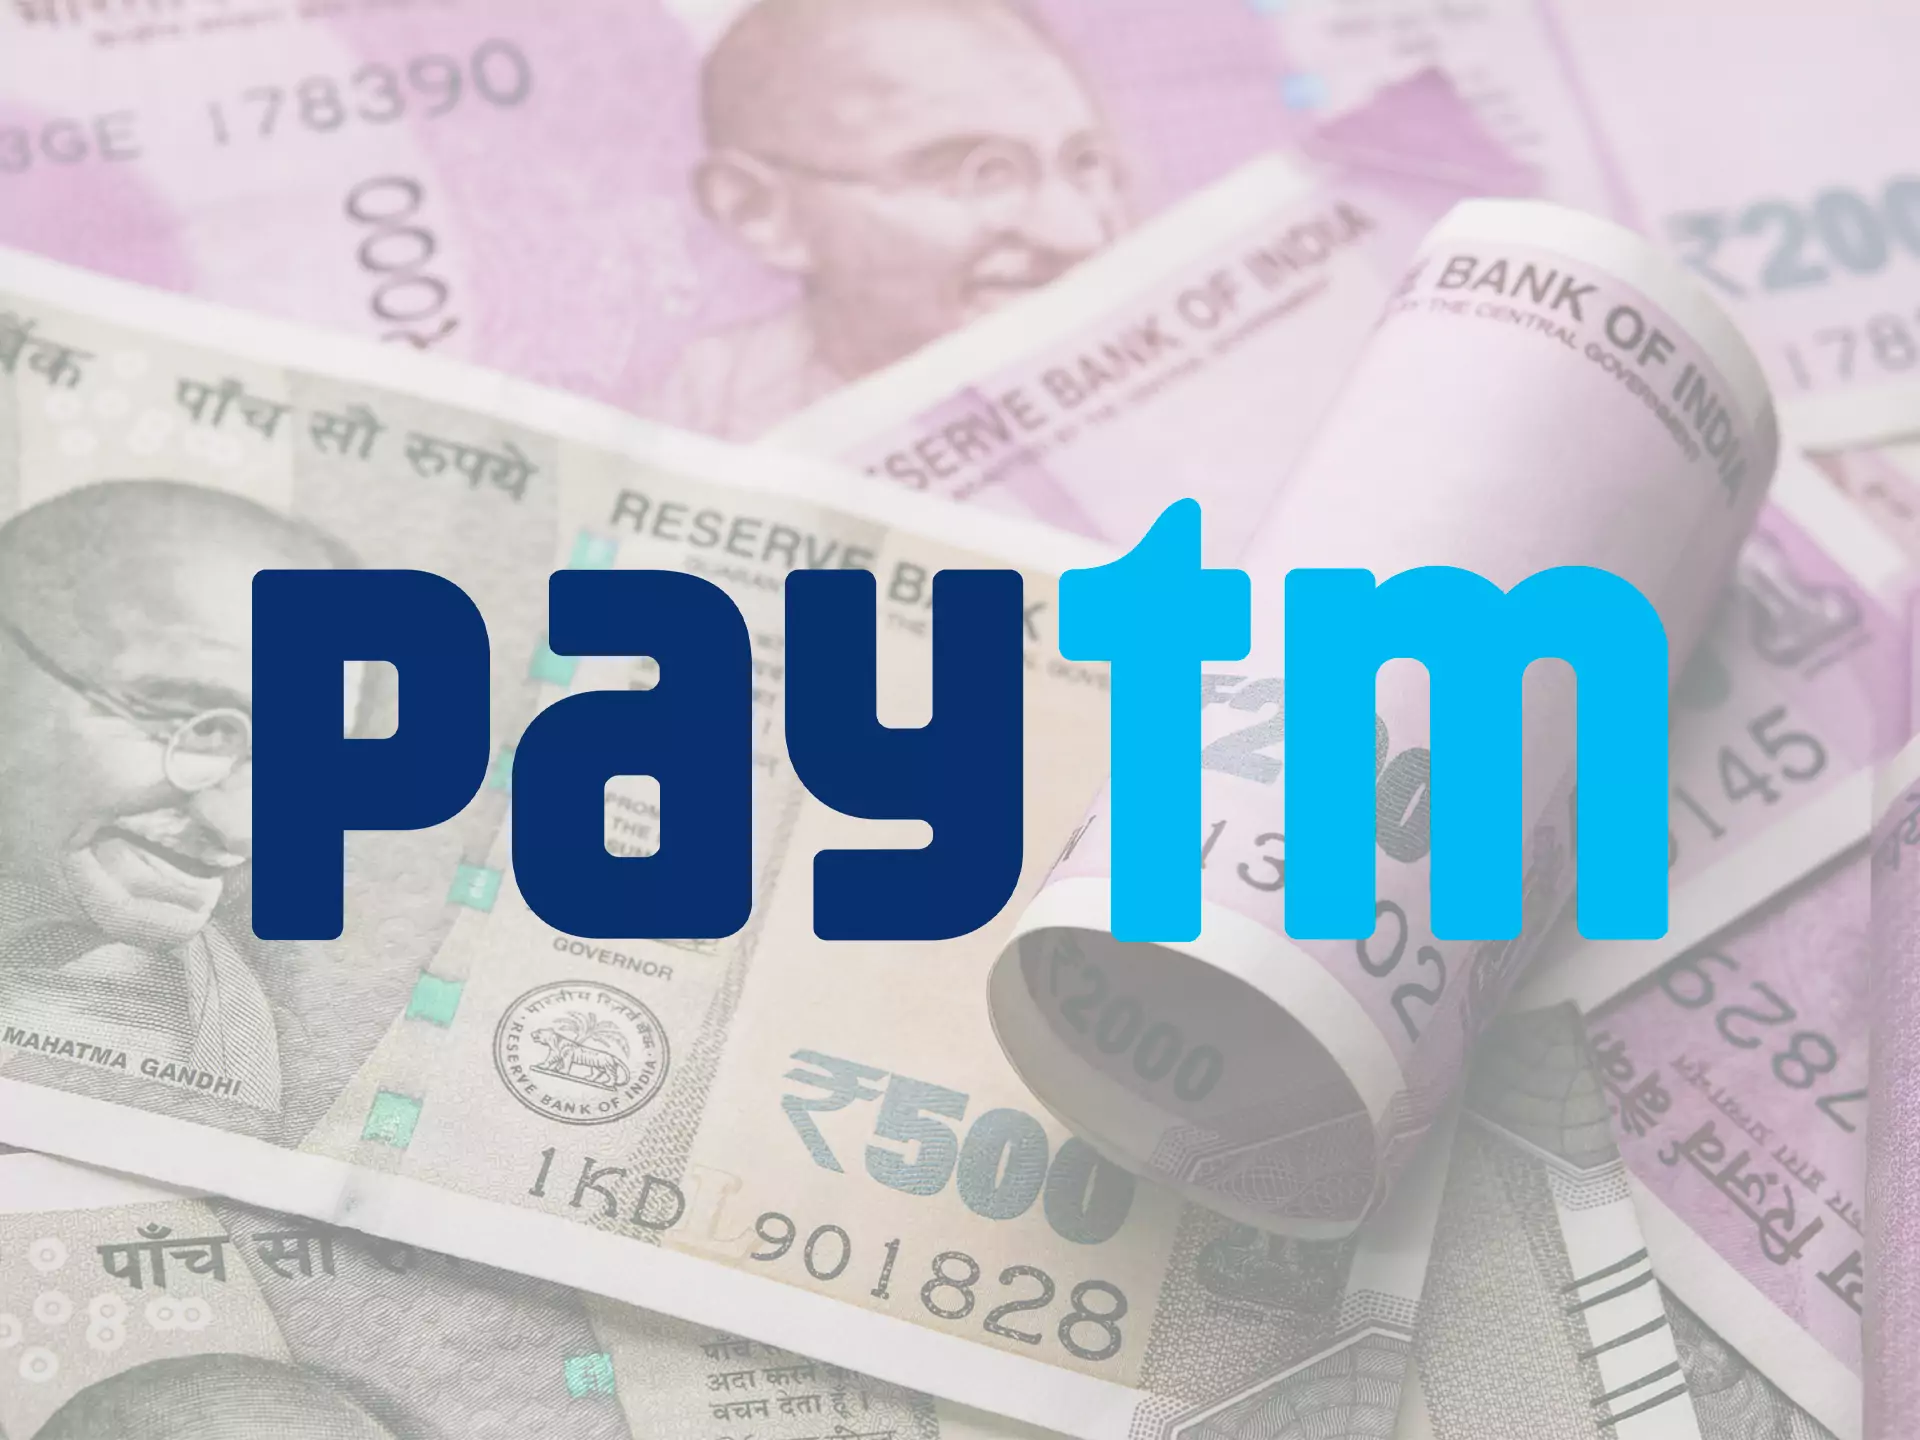 You can easily use PayTM for payments in rupees.